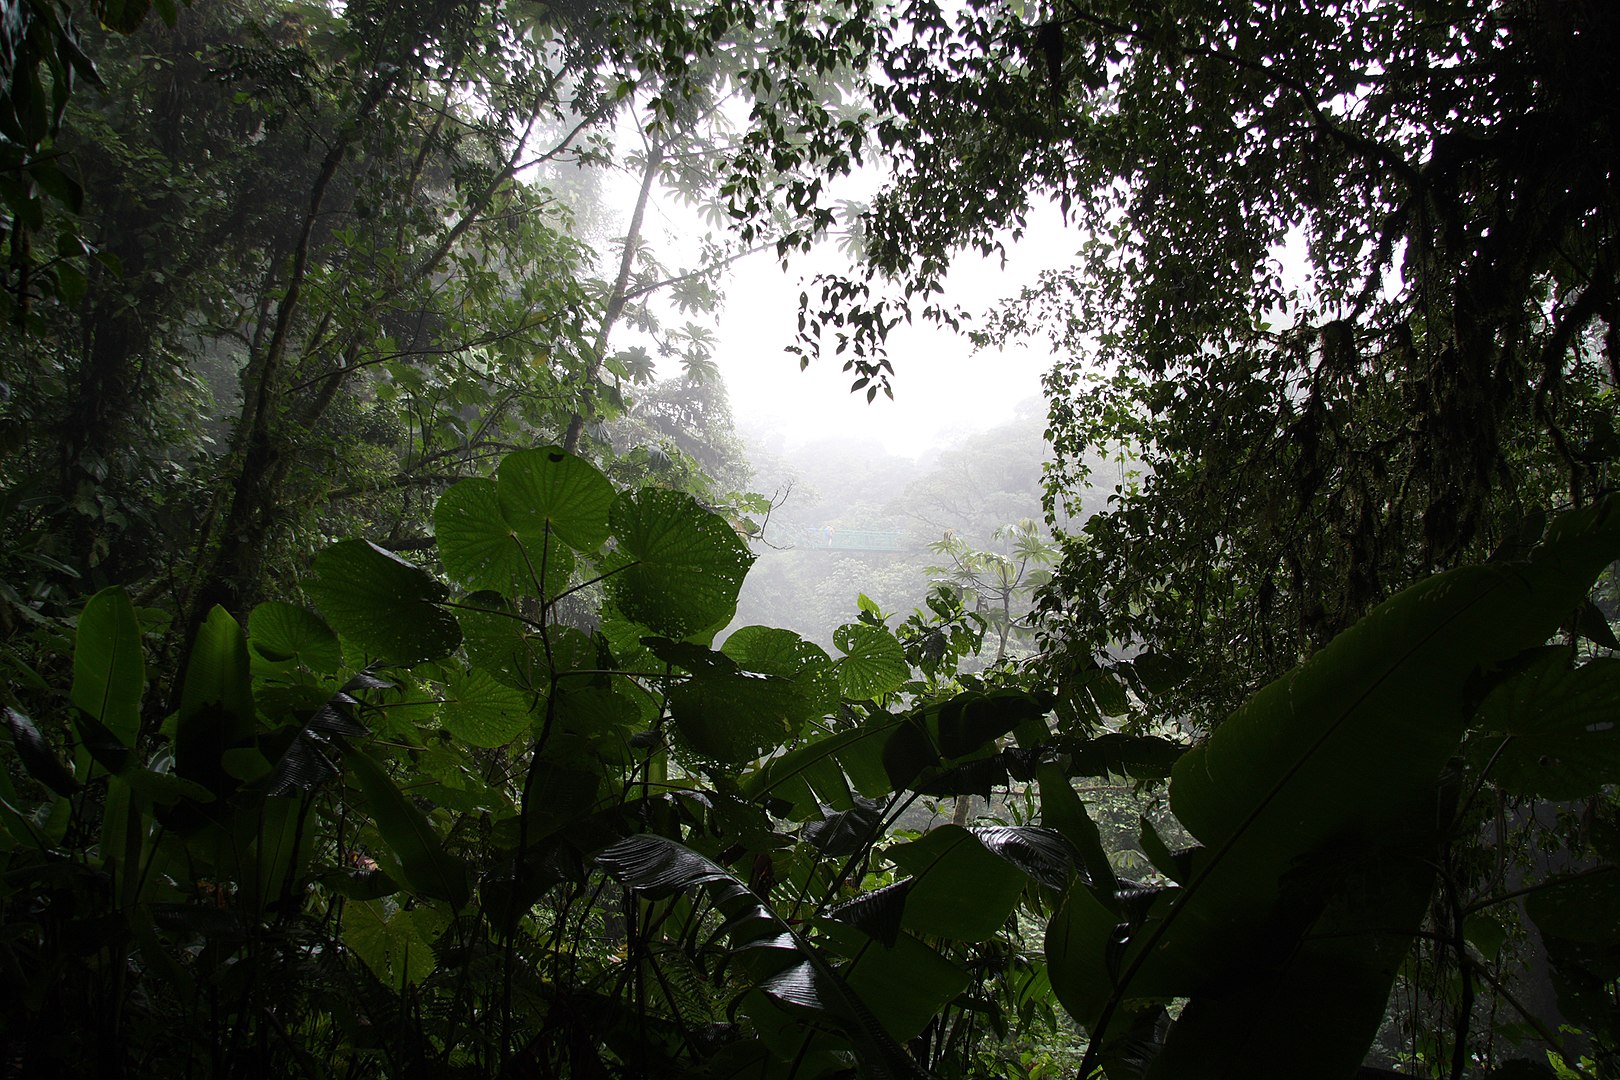 A foggy scene of a clouded forest.